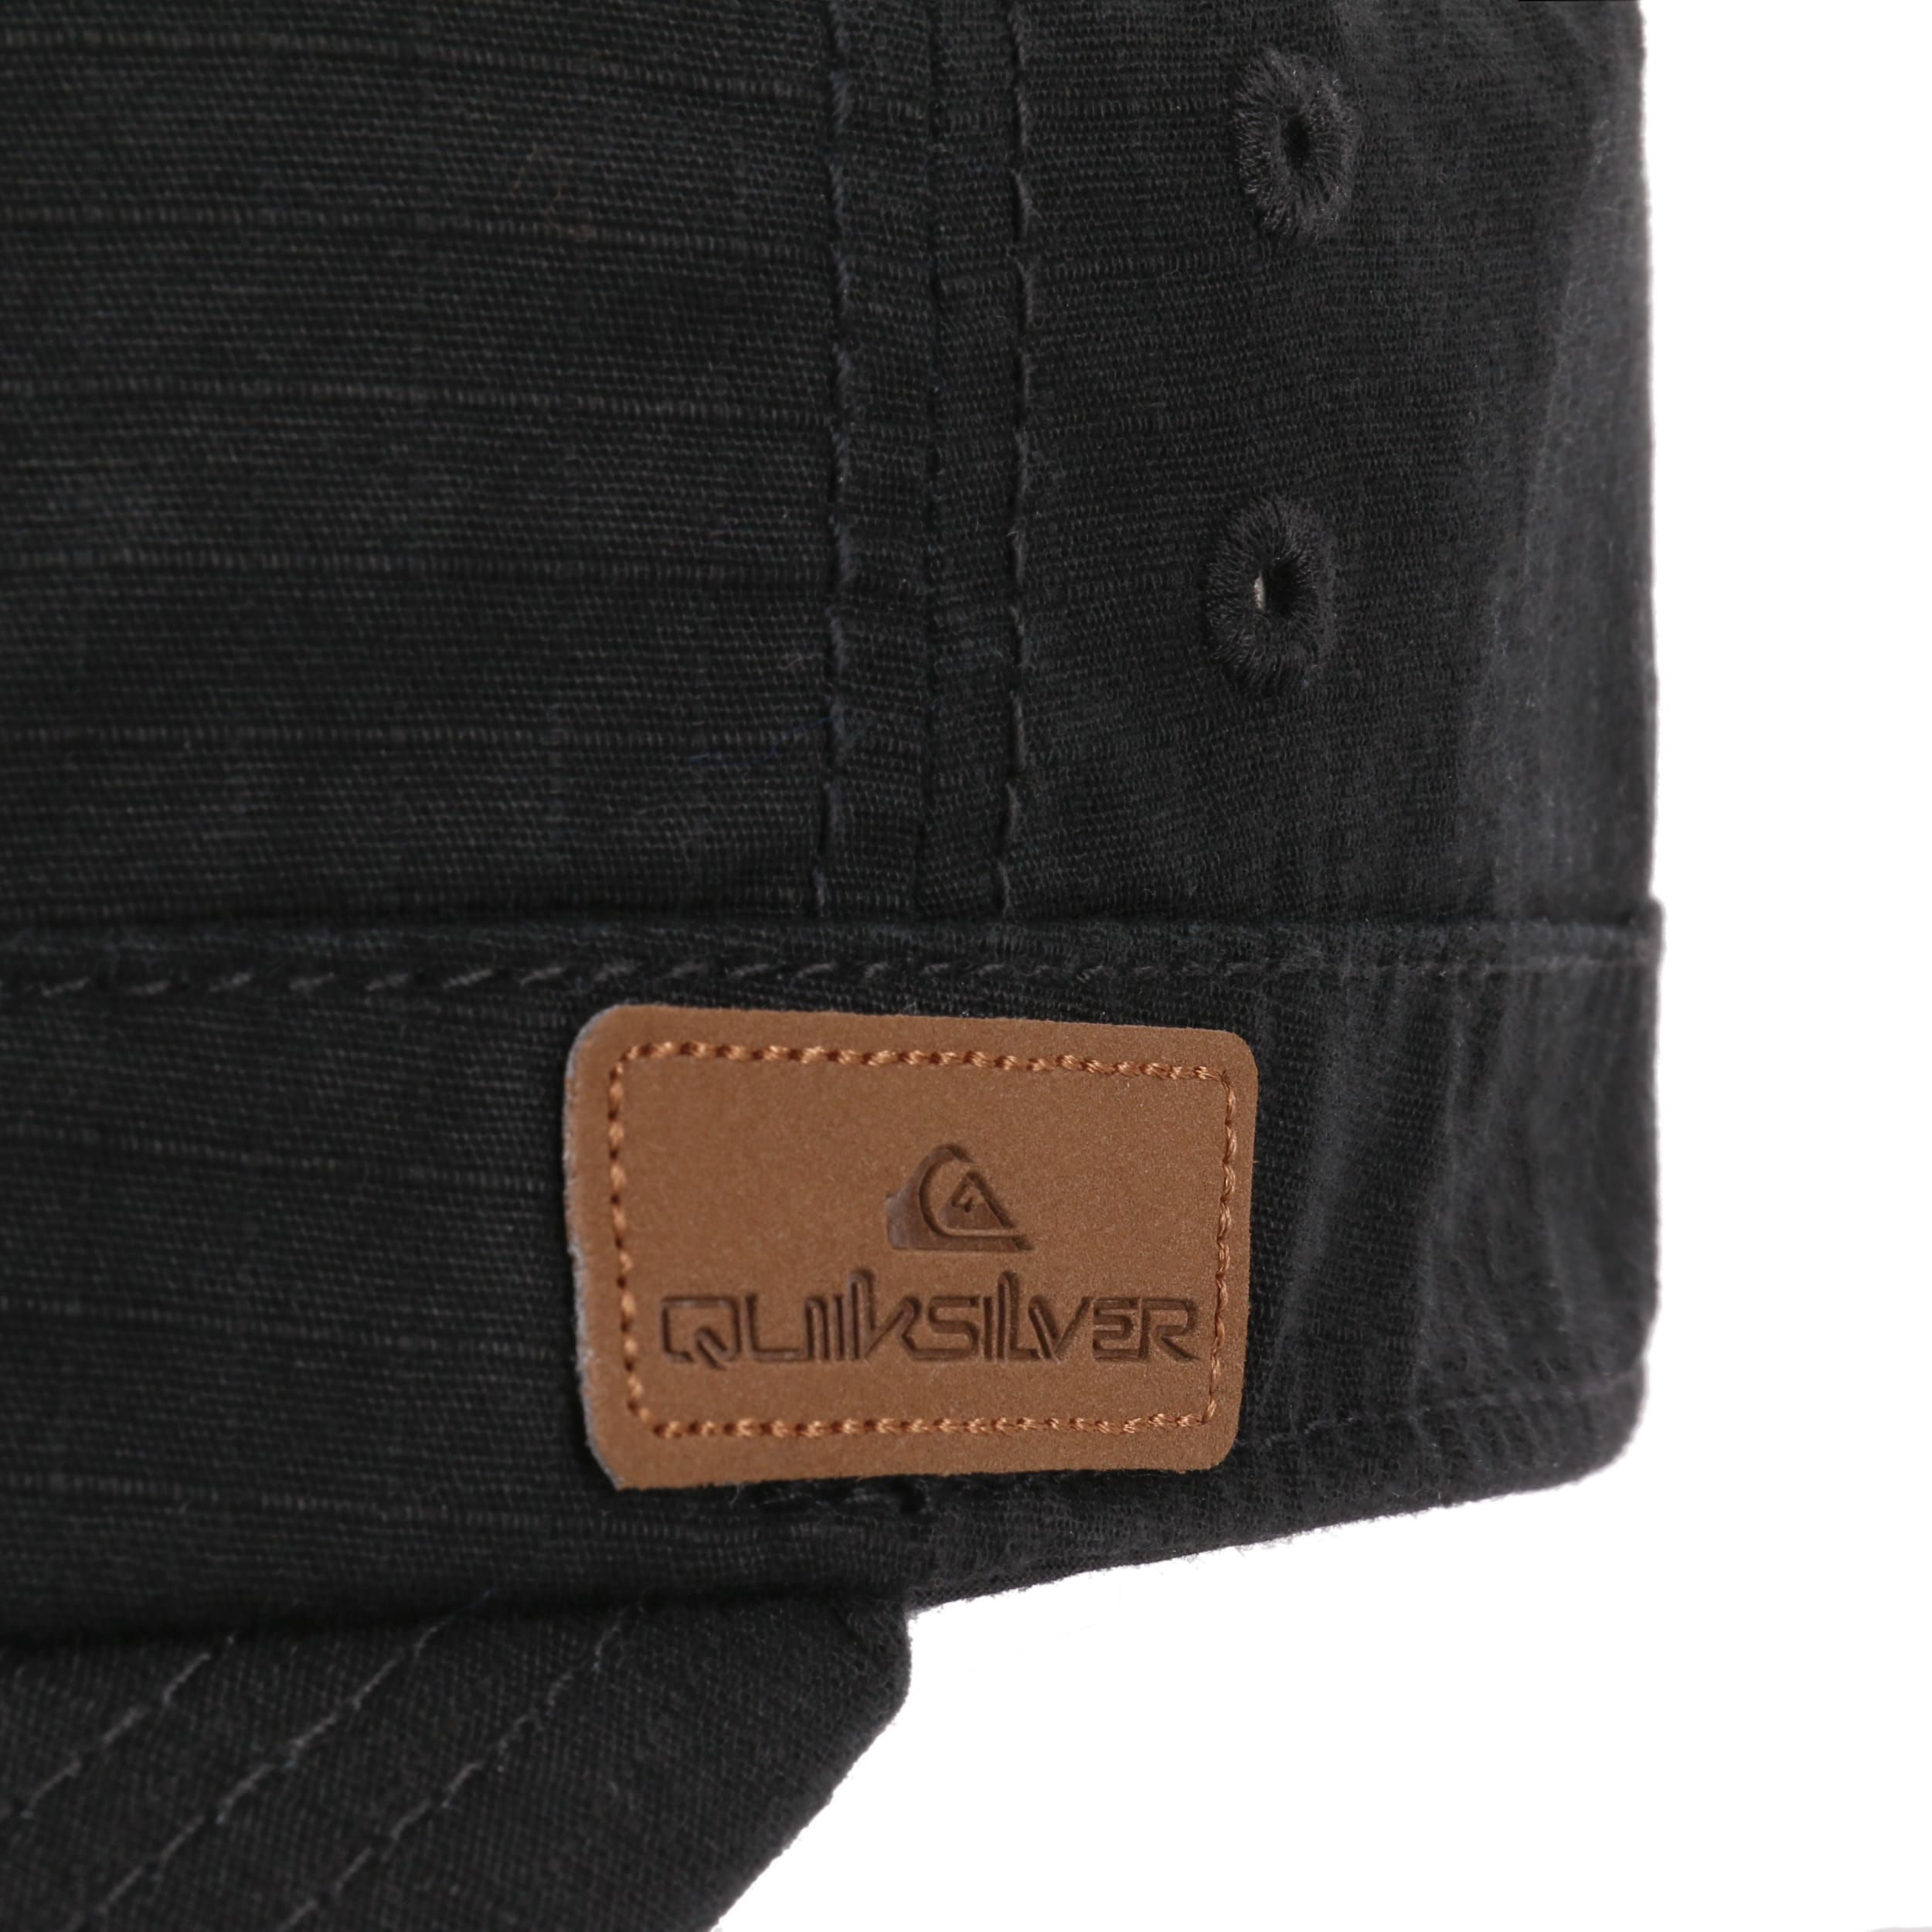 € - Quiksilver 32,95 2 Renegade by Army Cap